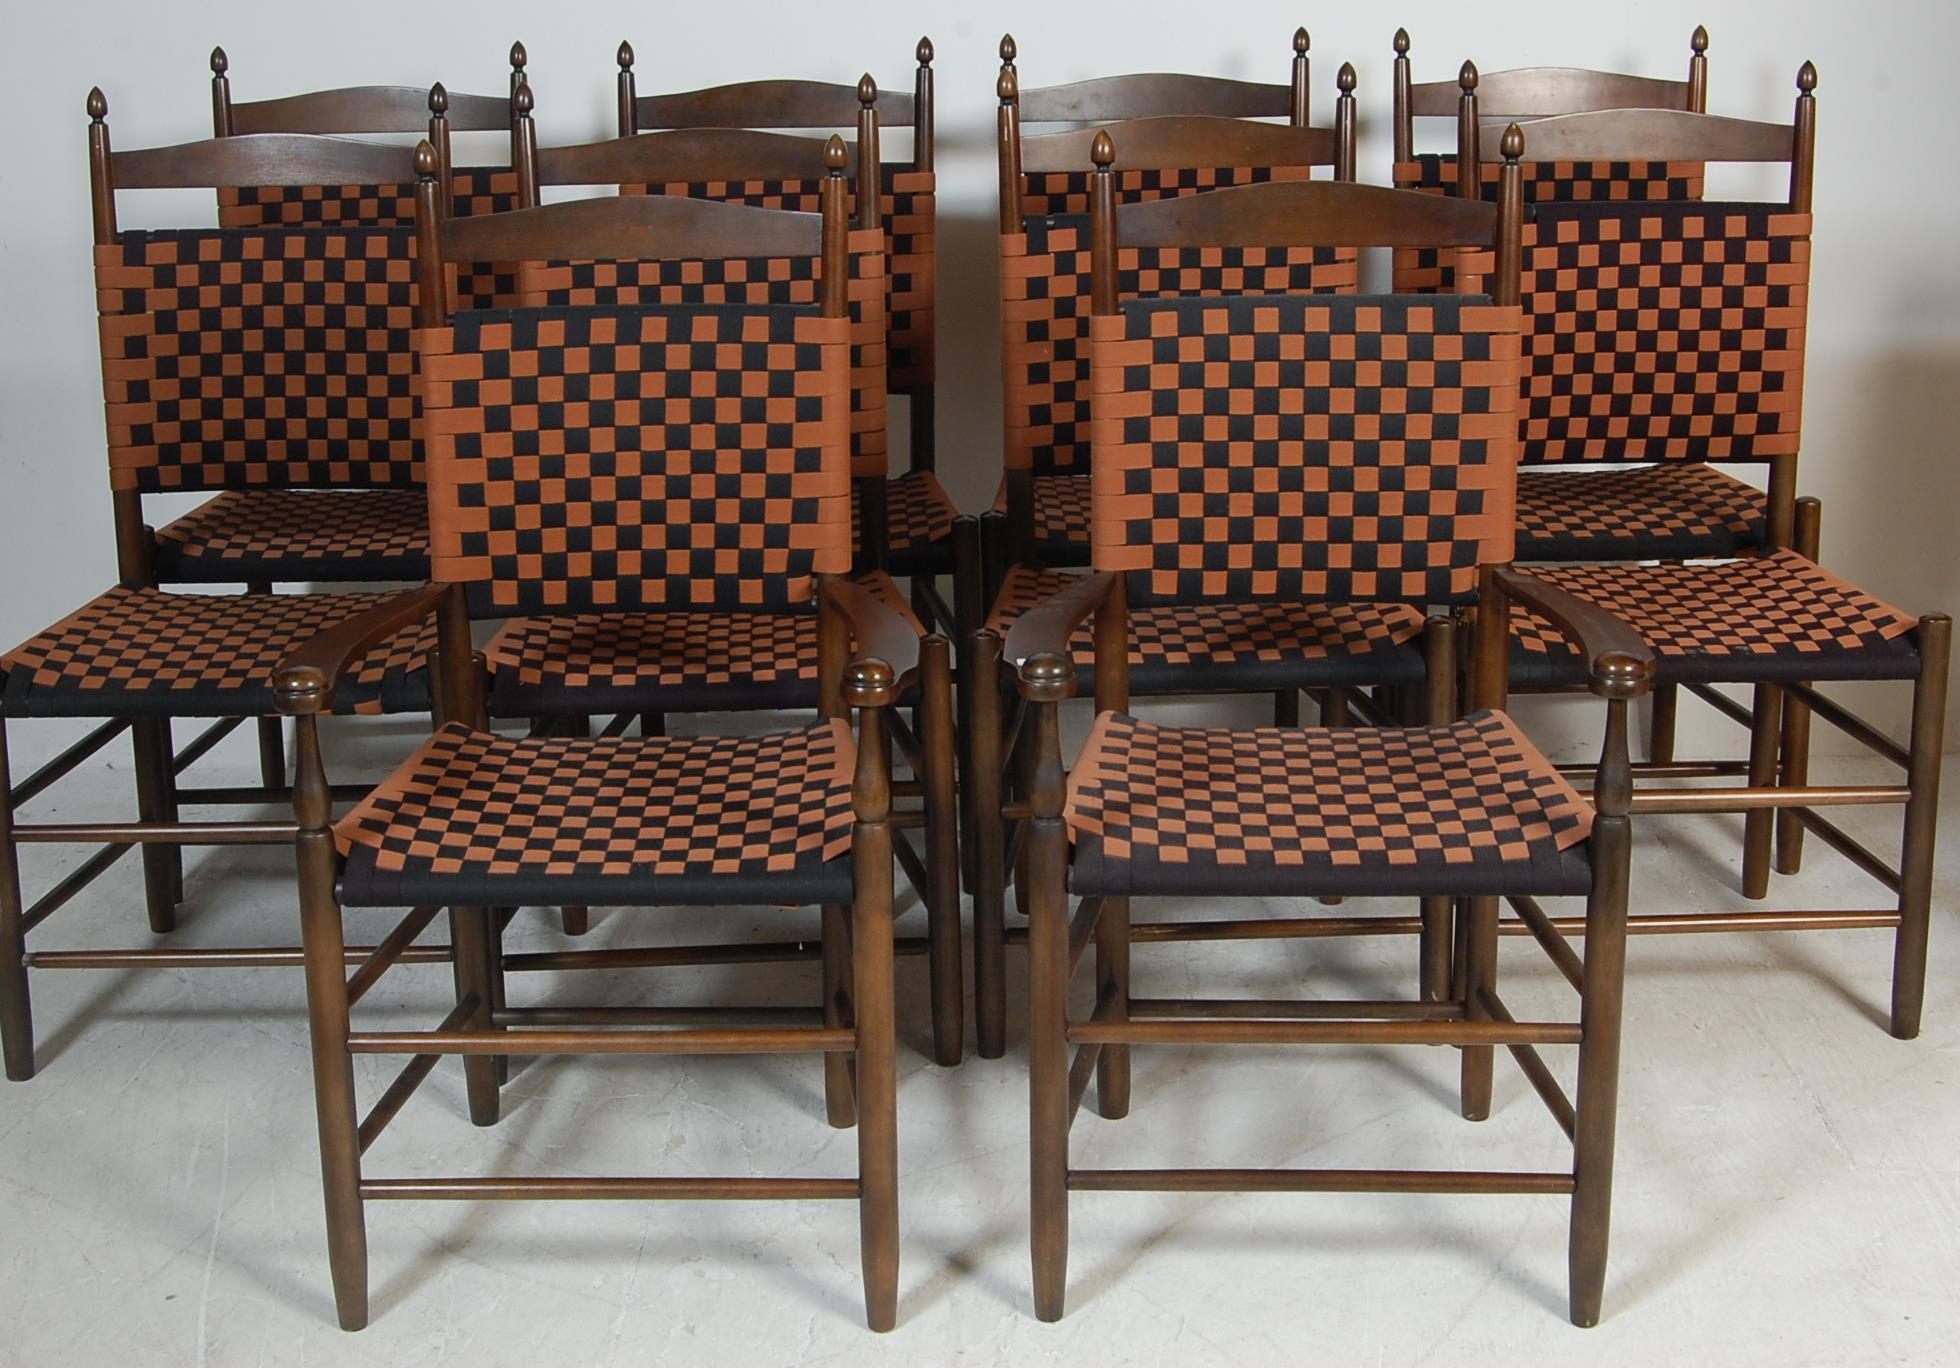 SET OF 10TH VINTAGE STYLE DINING CHAIRS